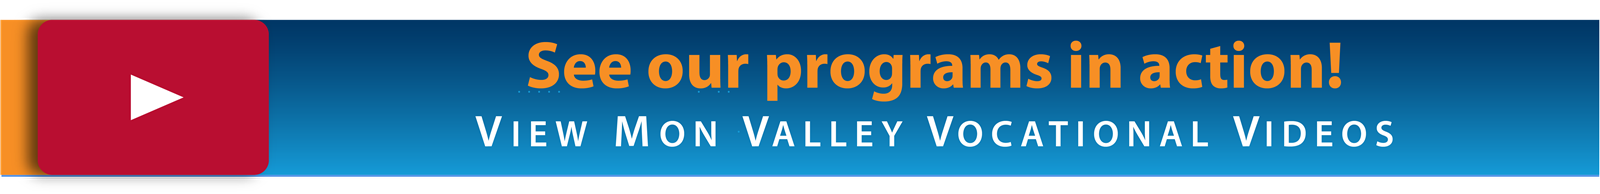 Click to view Mon Valley Vocational Videos